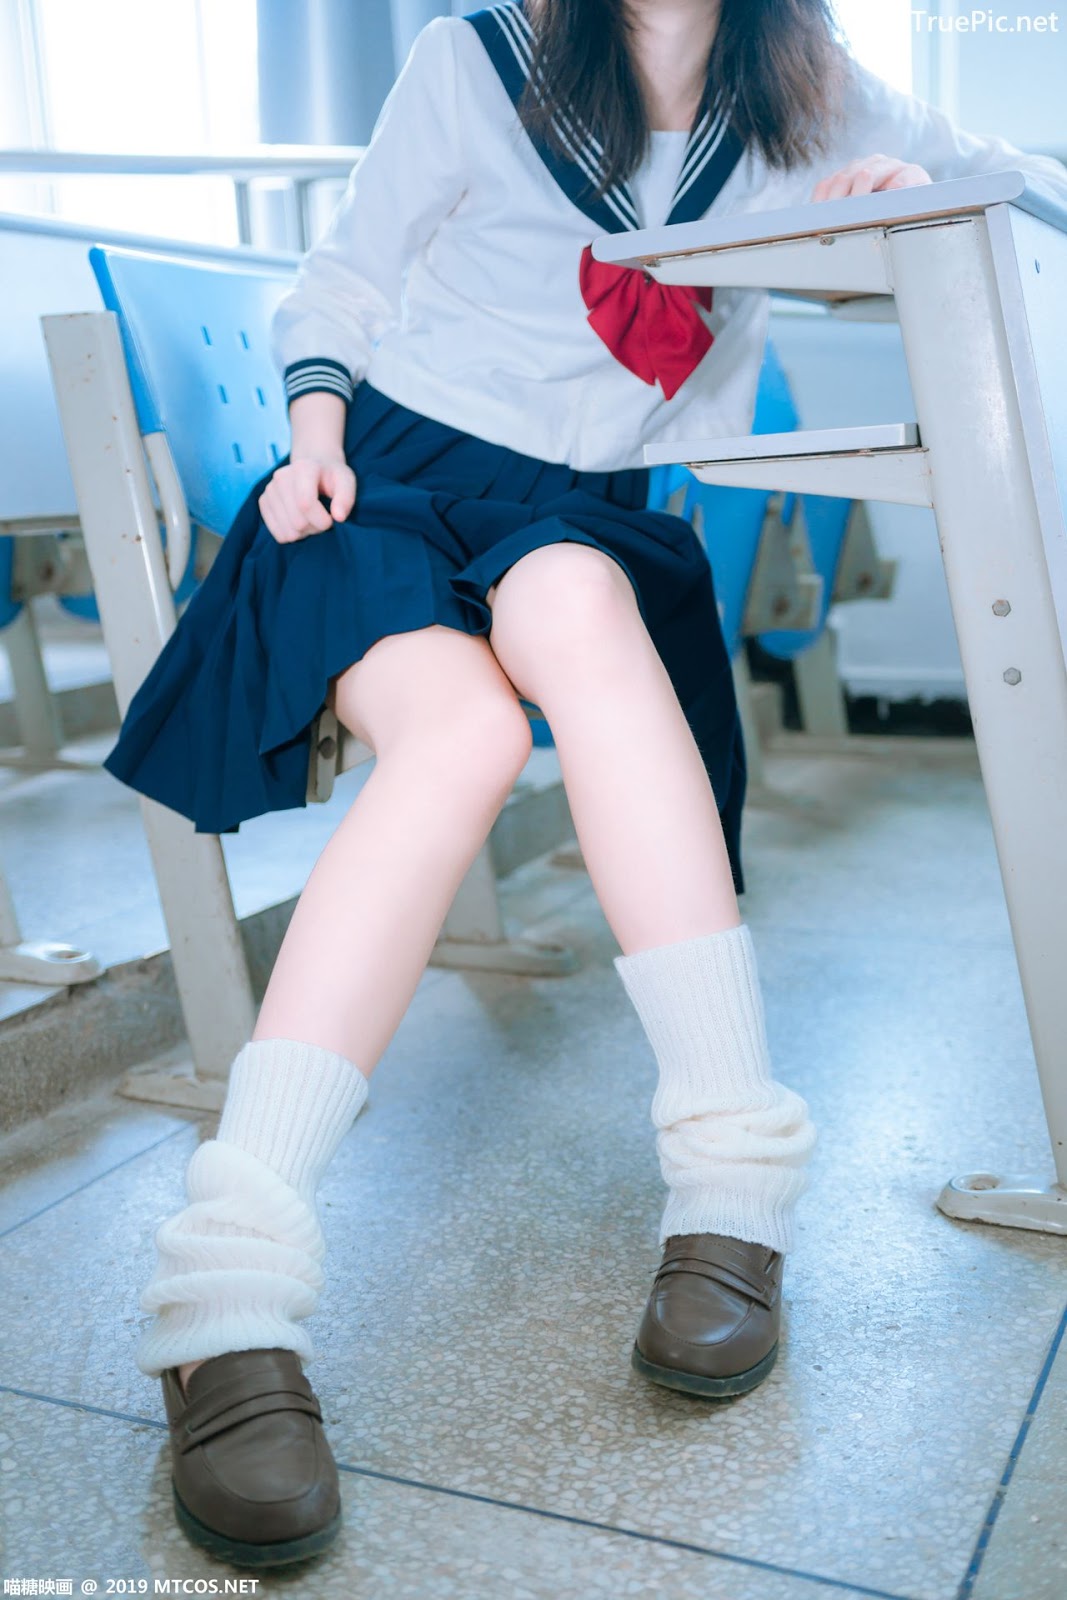 Image MTCos 喵糖映画 Vol.014 – Chinese Cute Model With Japanese School Uniform - TruePic.net- Picture-8